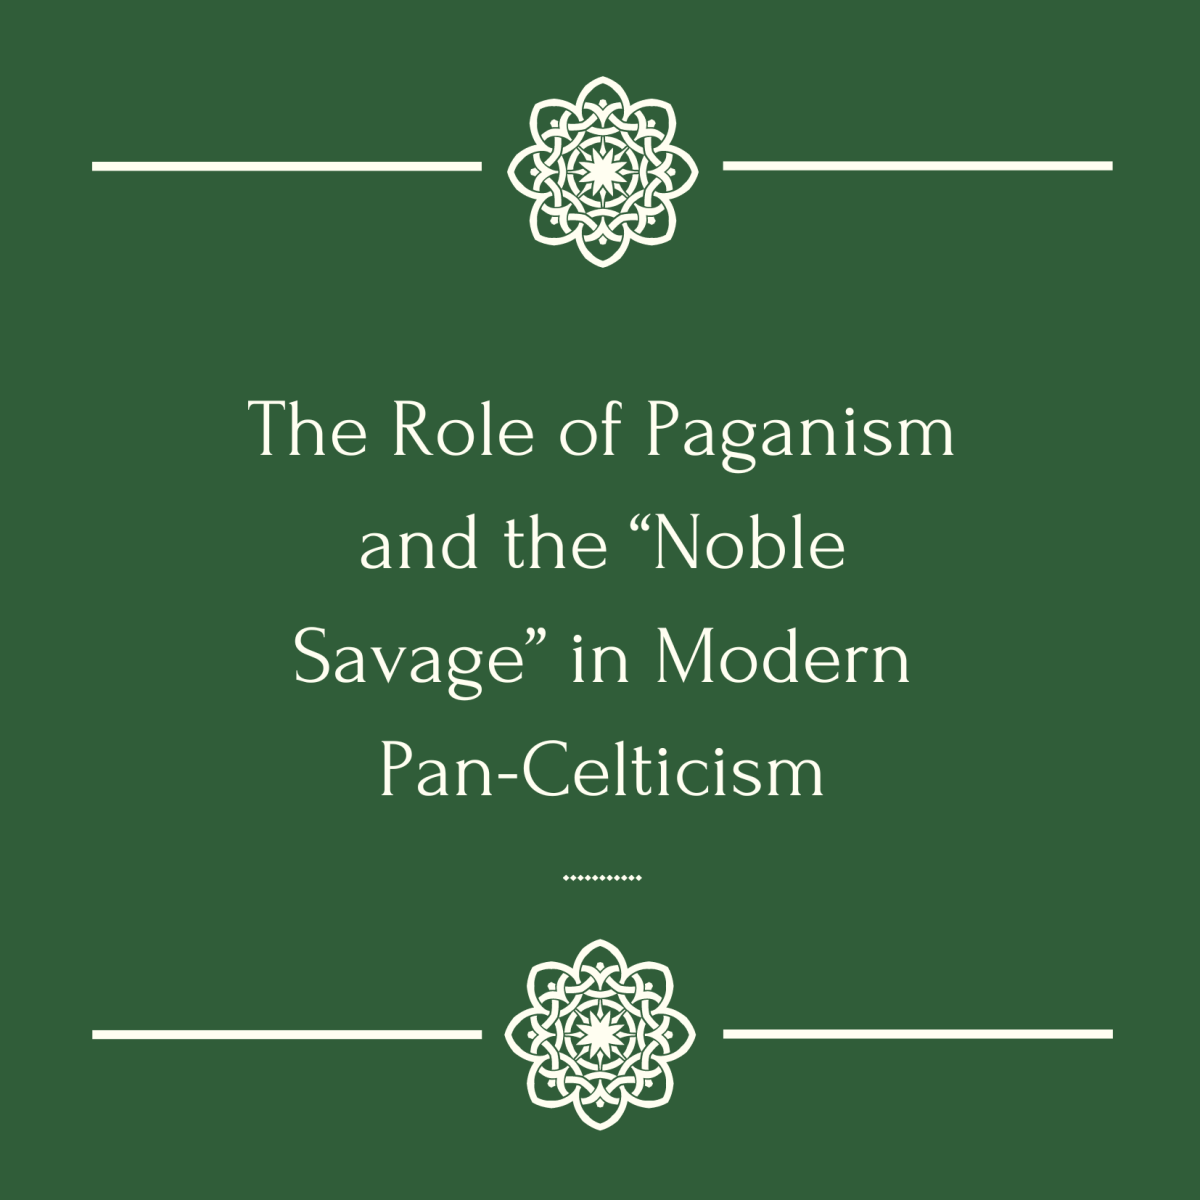 The Role of Paganism and the “Noble Savage” in Modern Pan-Celticism